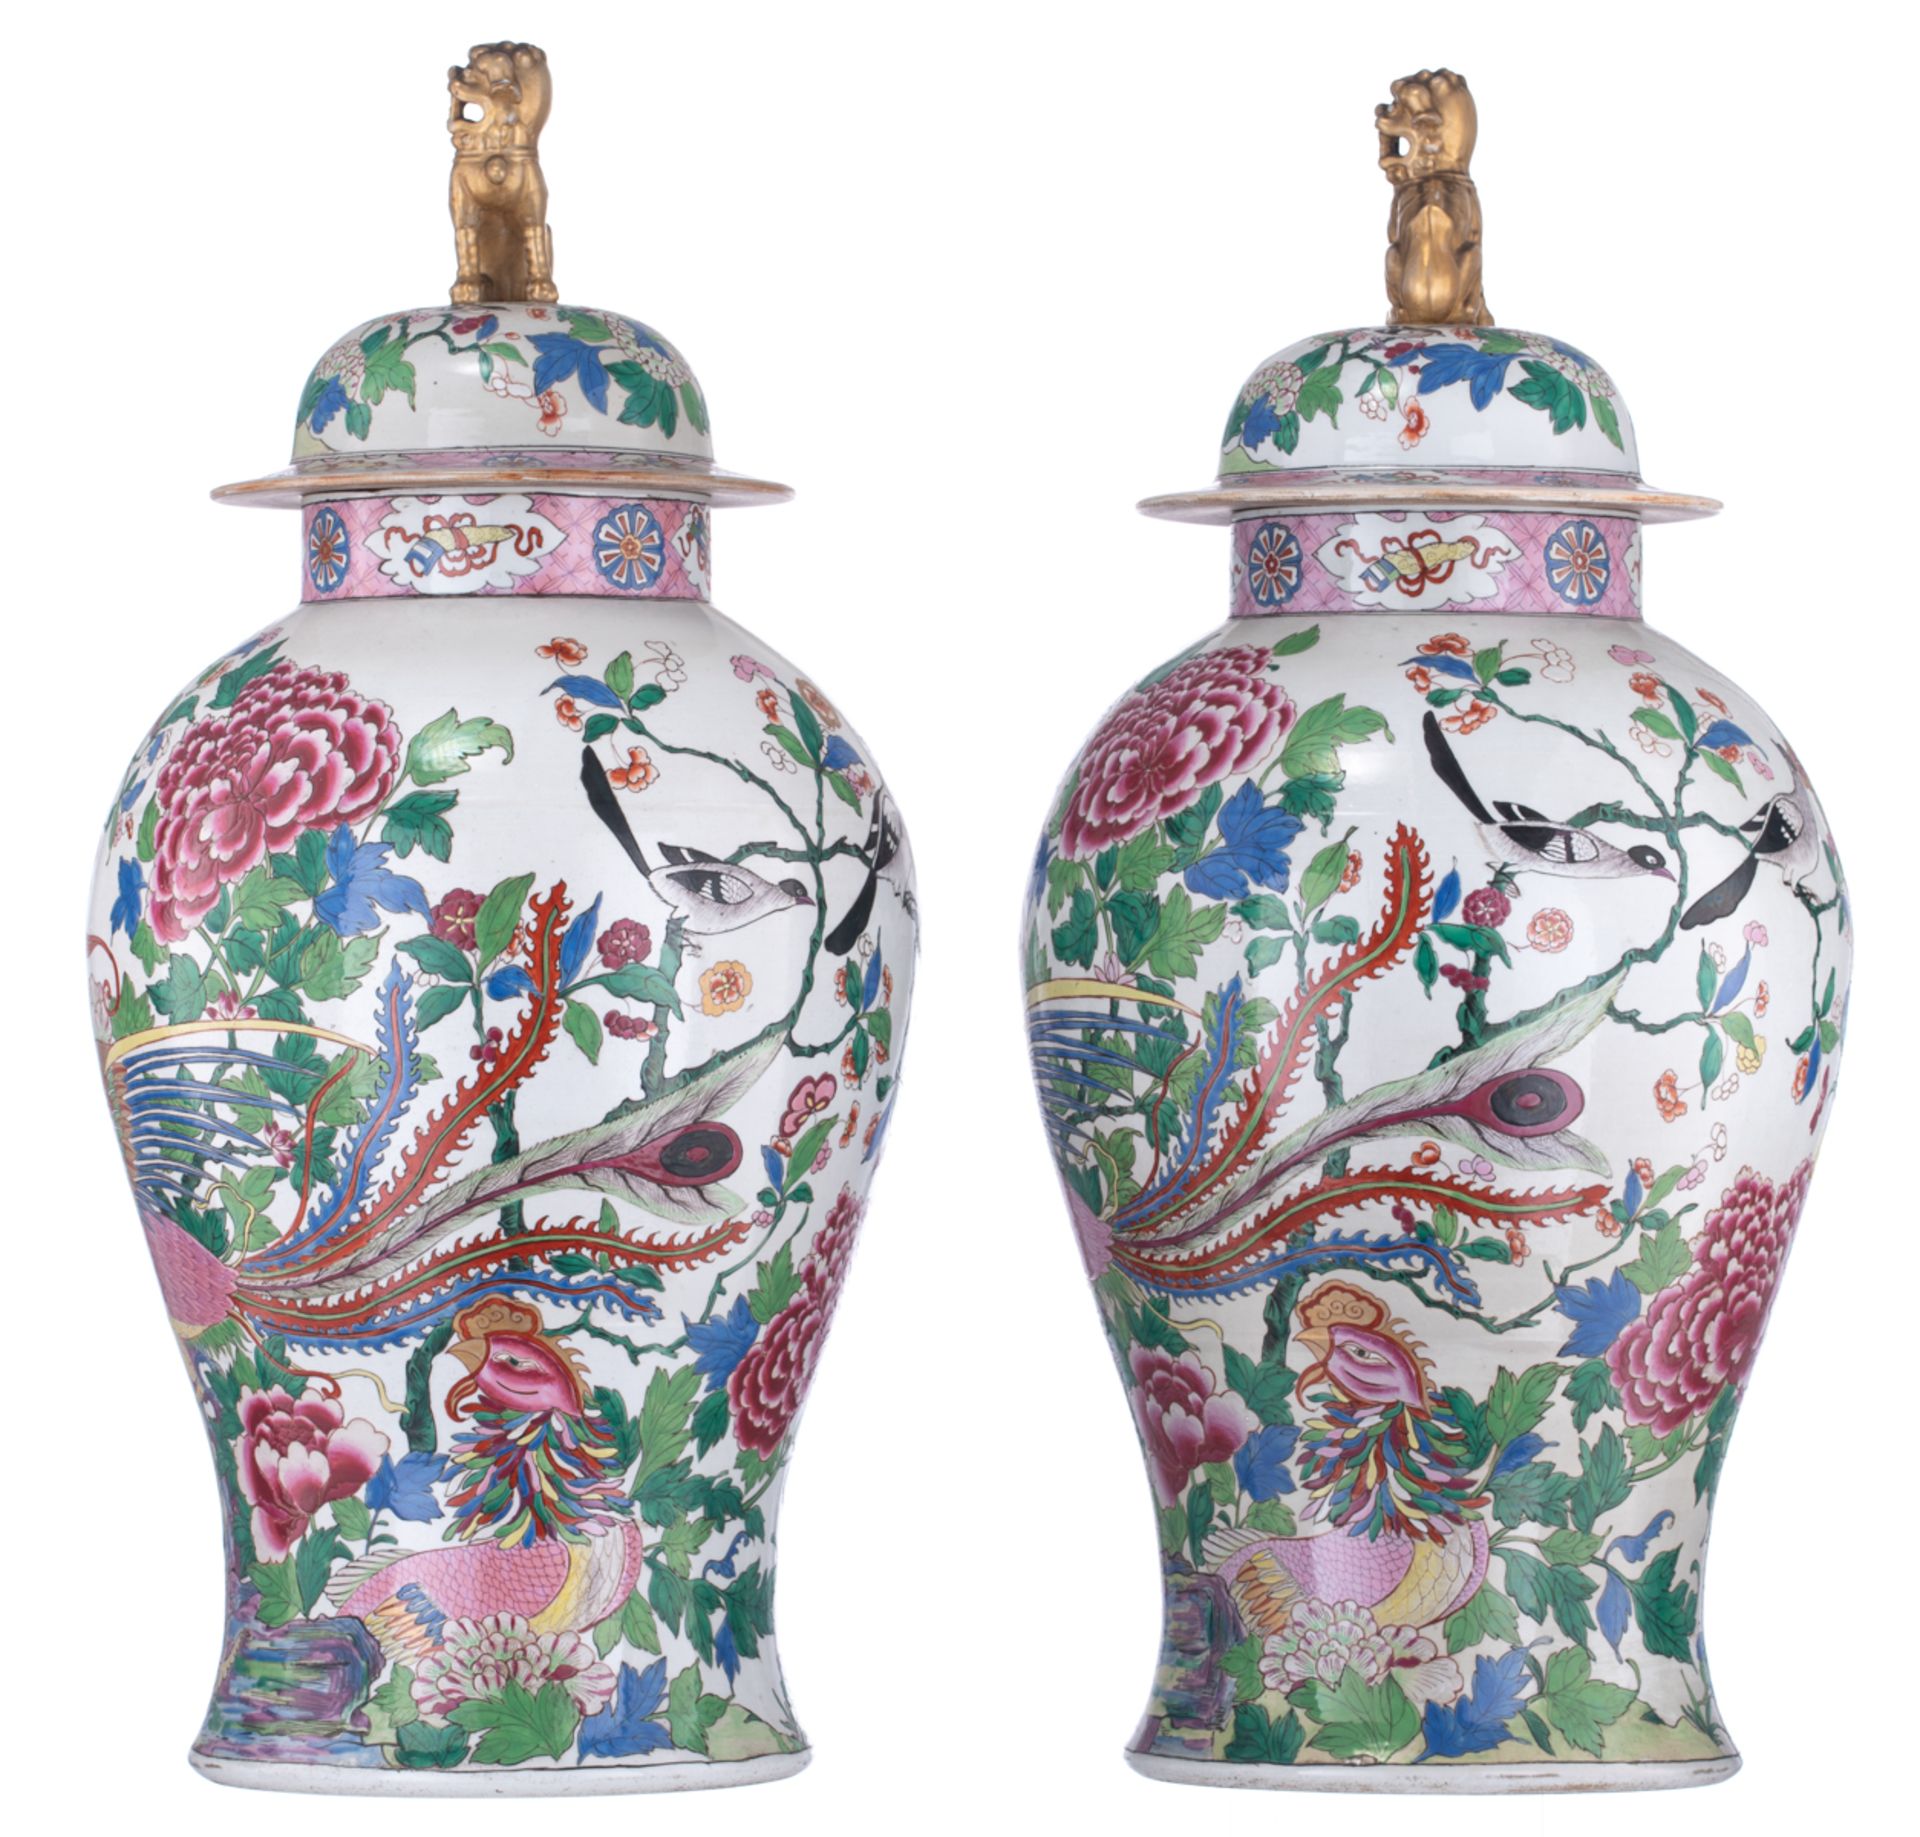 A large pair of covered famille rose Samson vases, decorated with birds and griffons in a floral set - Image 2 of 8